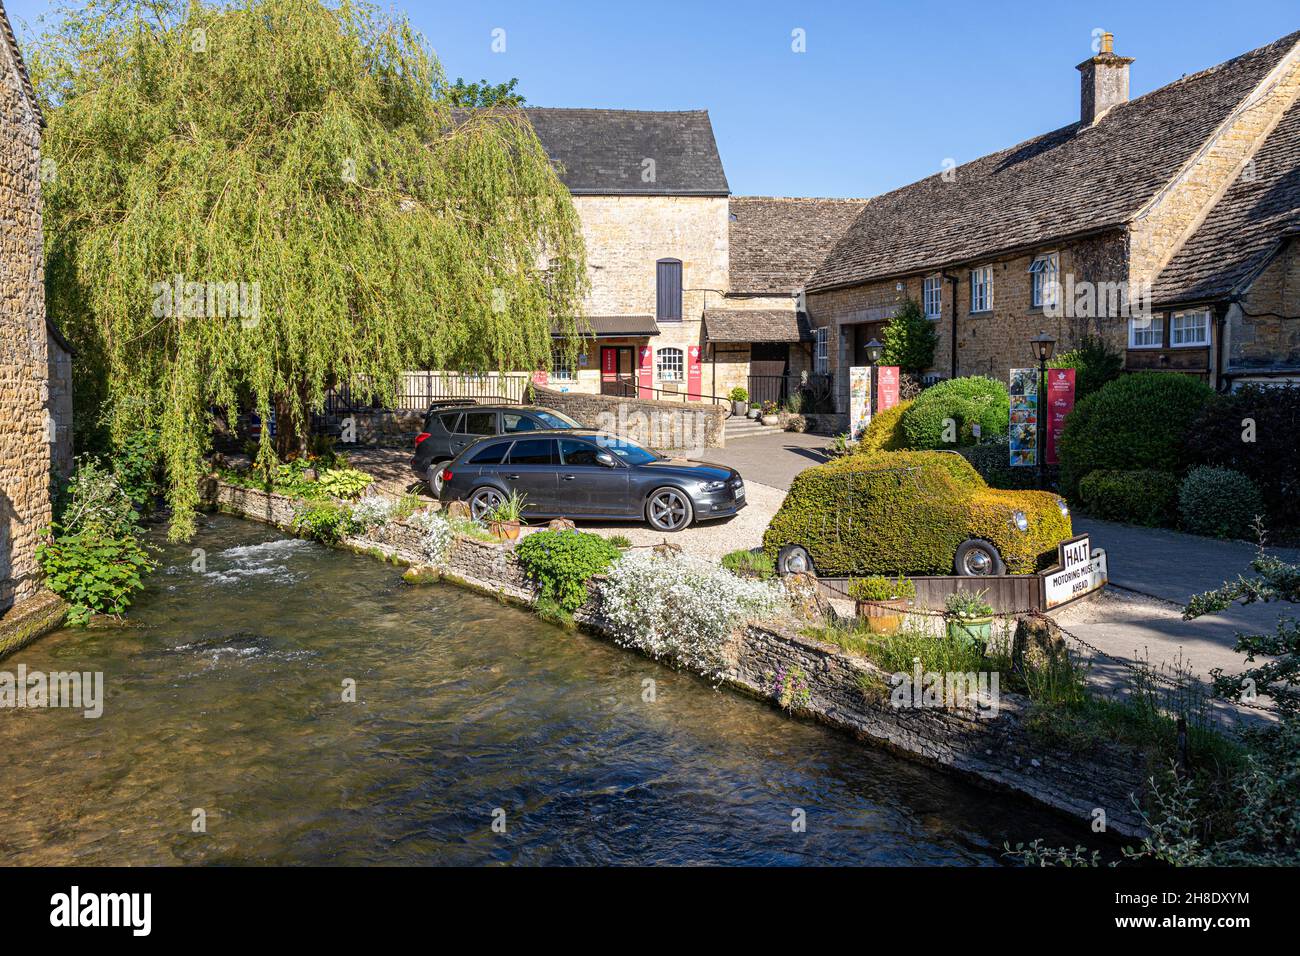 Das Cotswold Motoring Museum & Toy Collection am River Windrush im Cotswold-Dorf Bourton on the Water, Gloucestershire, Großbritannien. Stockfoto